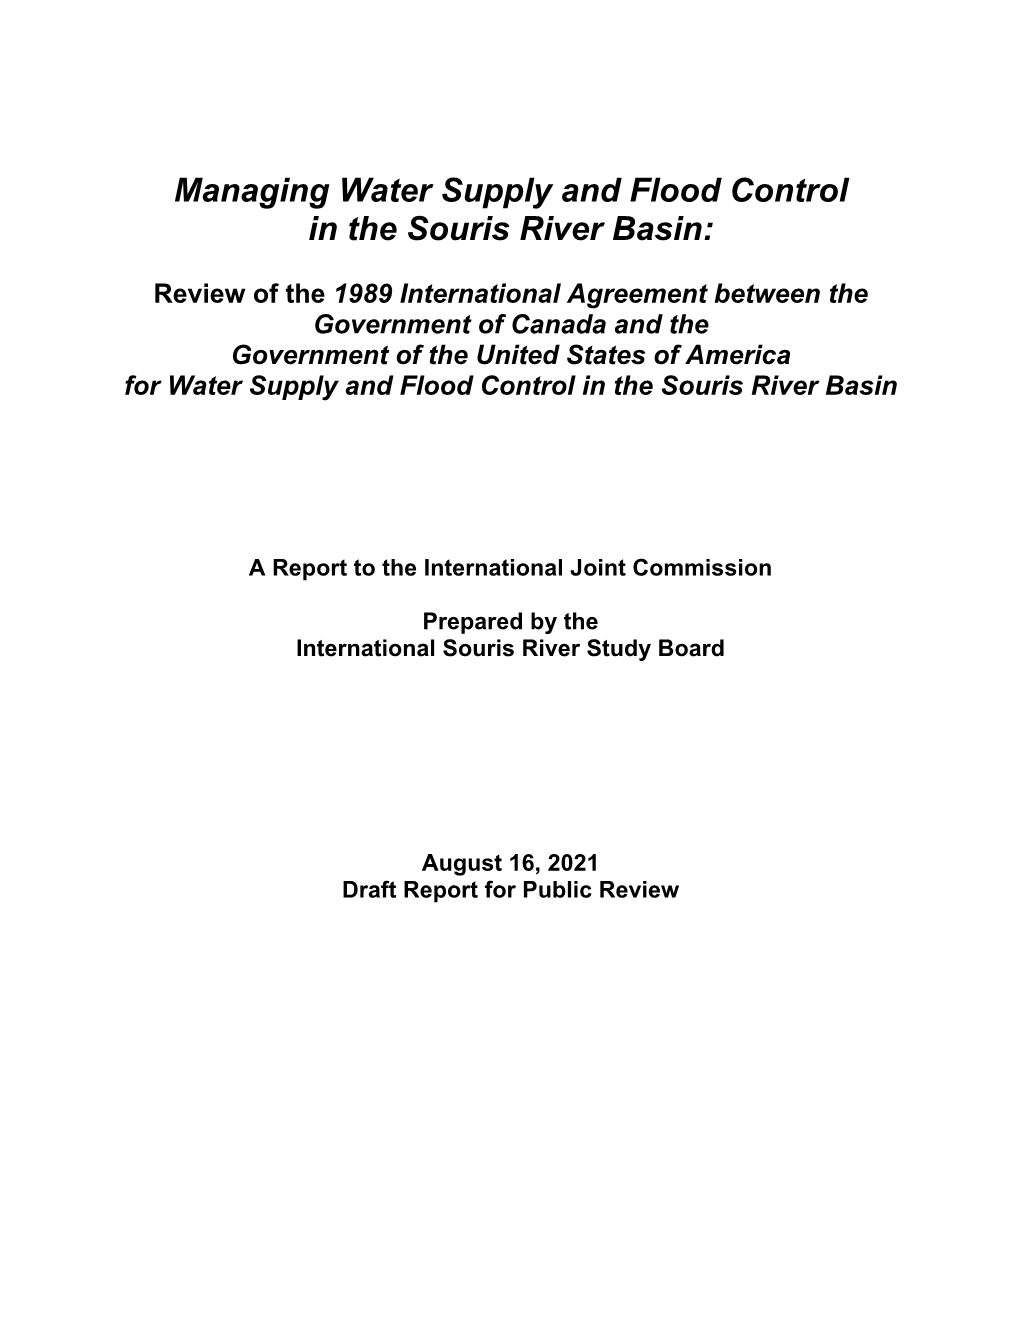 Managing Water Supply and Flood Control in the Souris River Basin